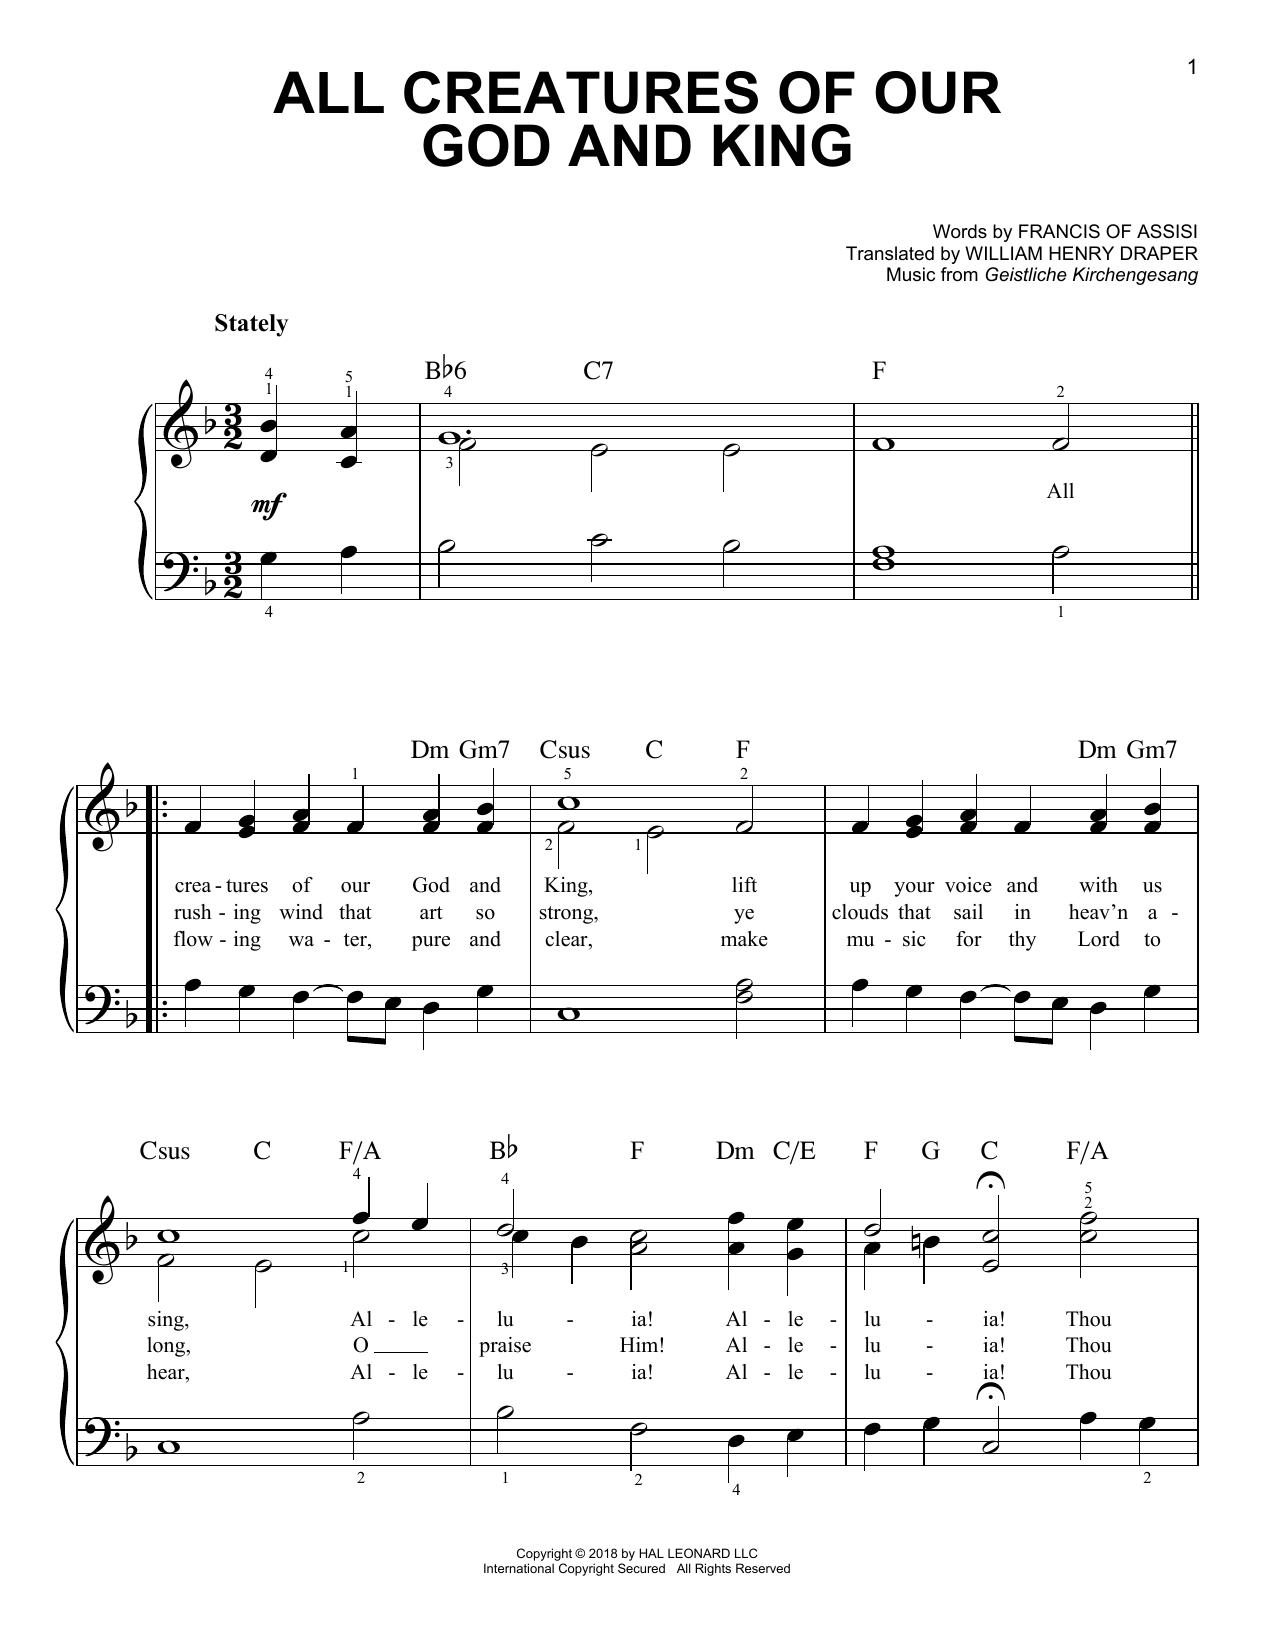 Download Geistliche Kirchengesang All Creatures Of Our God And King Sheet Music